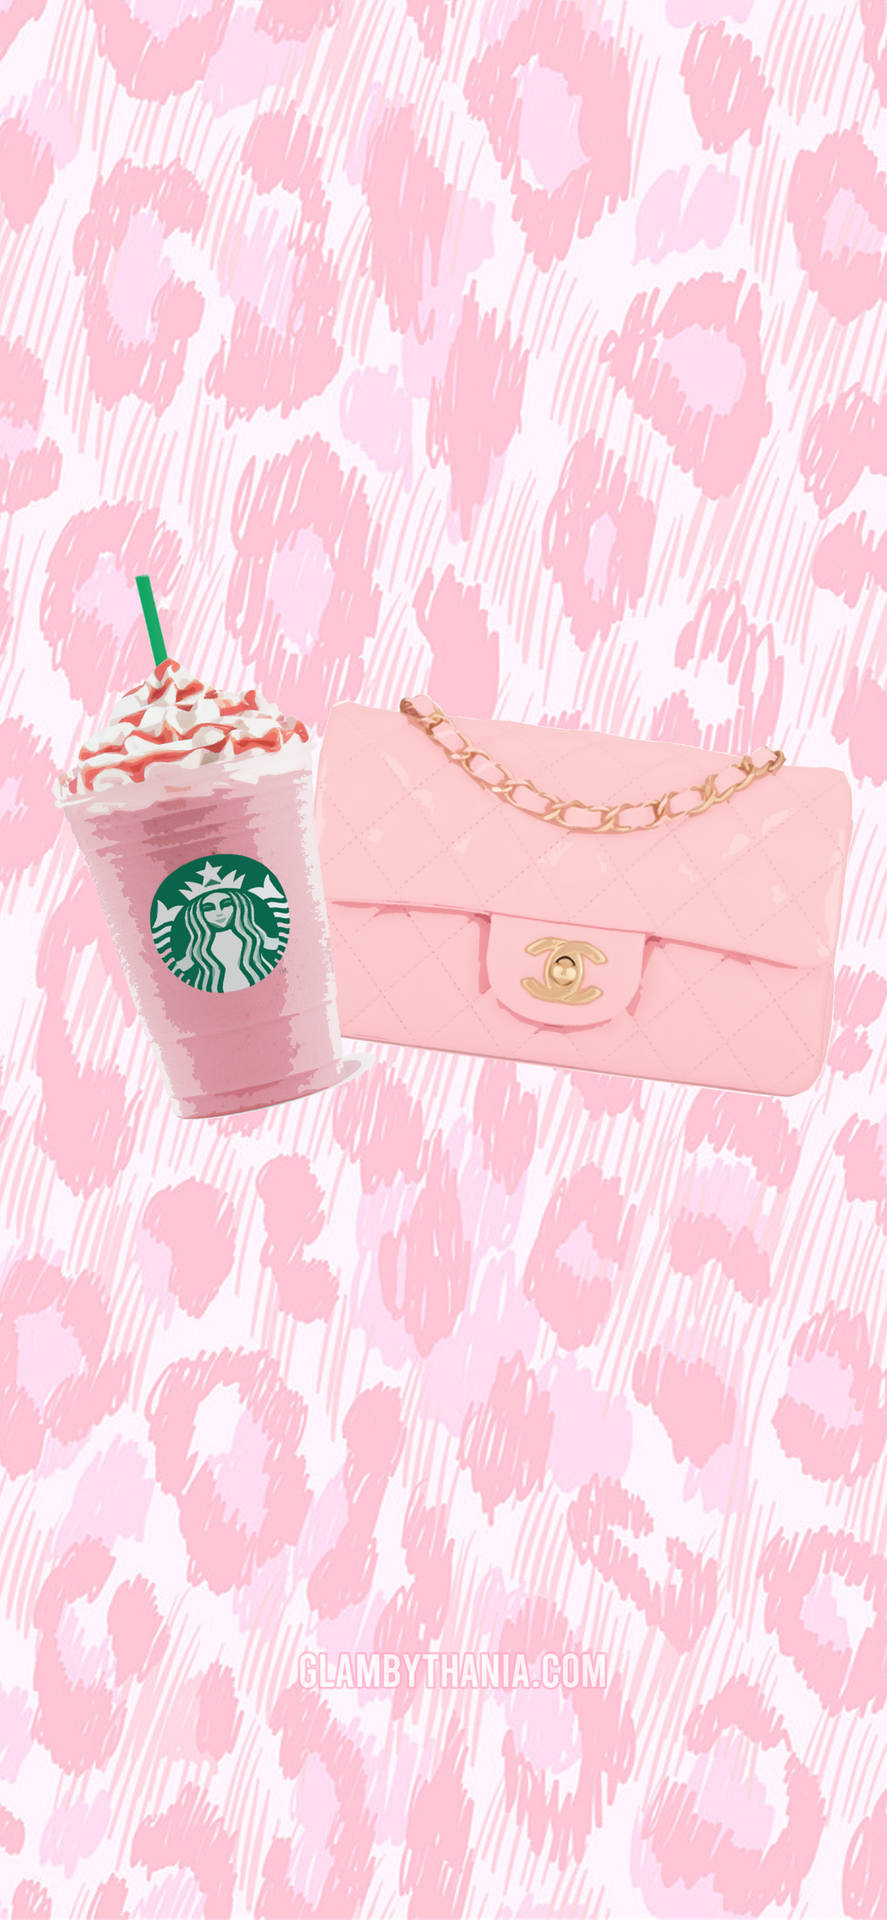 Pink Purse And Starbucks Girly Iphone Wallpaper